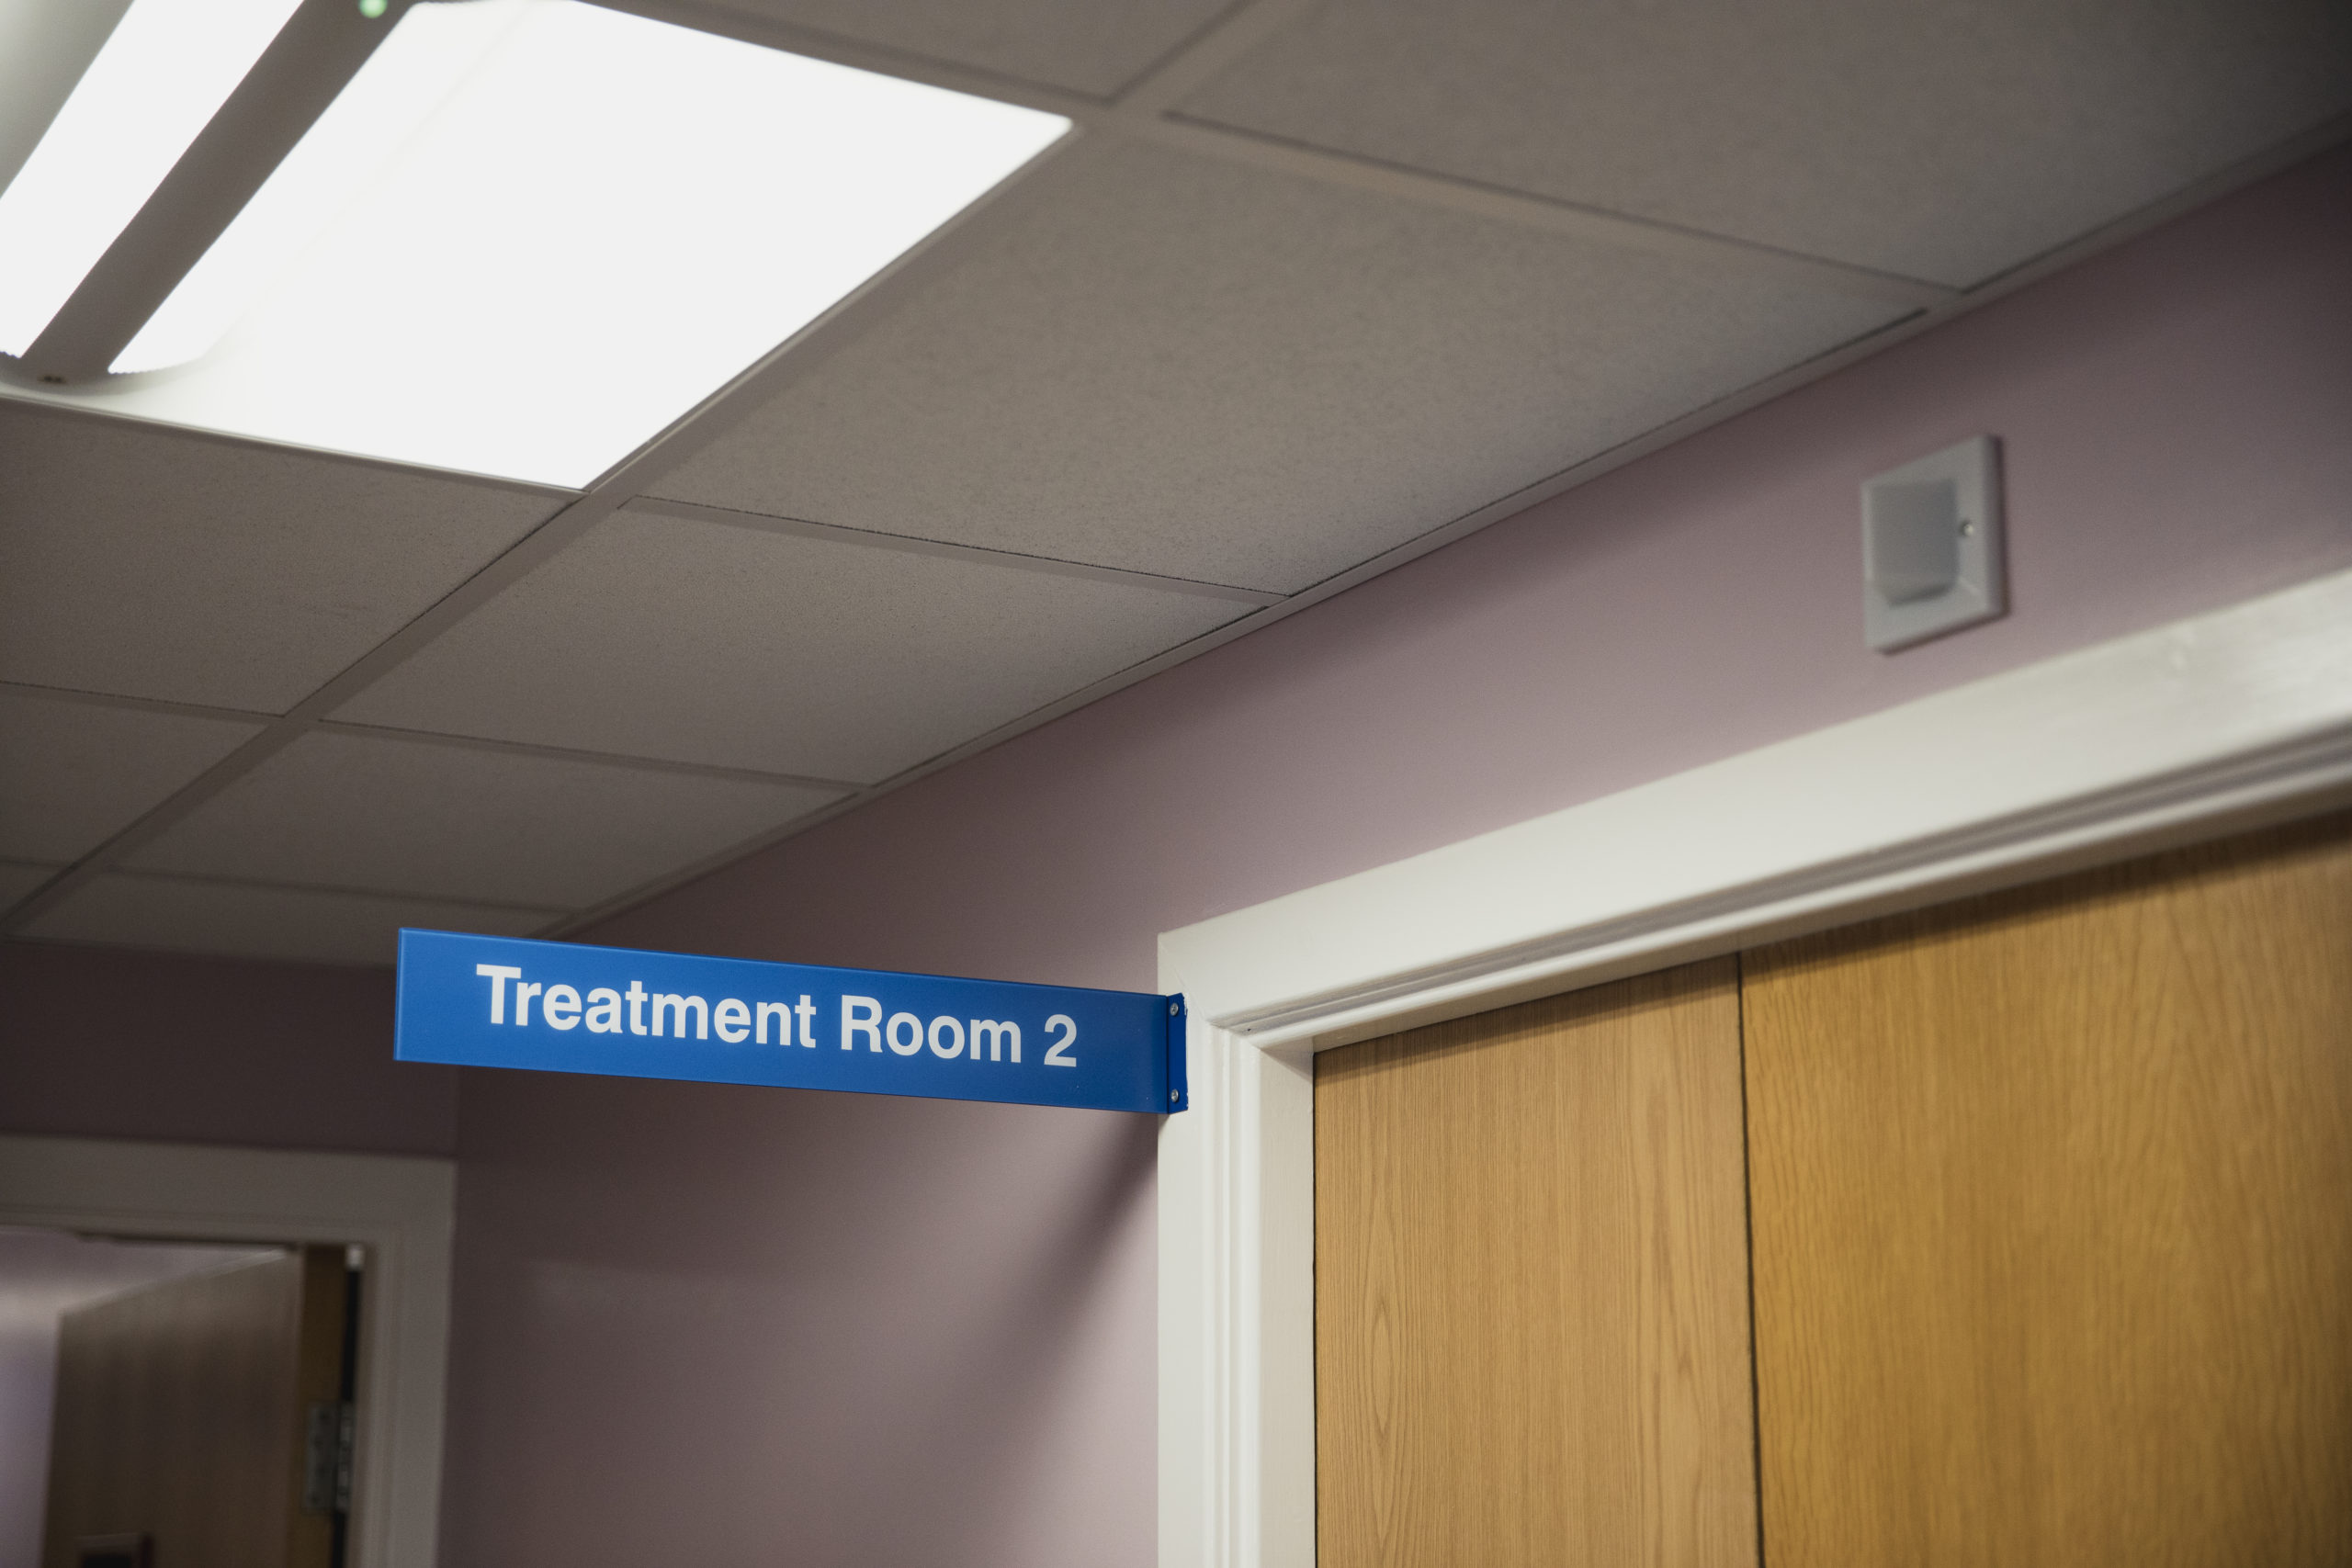 Sign in hallway reading “treatment Room 2” illustrating need for professional treatment for depression.